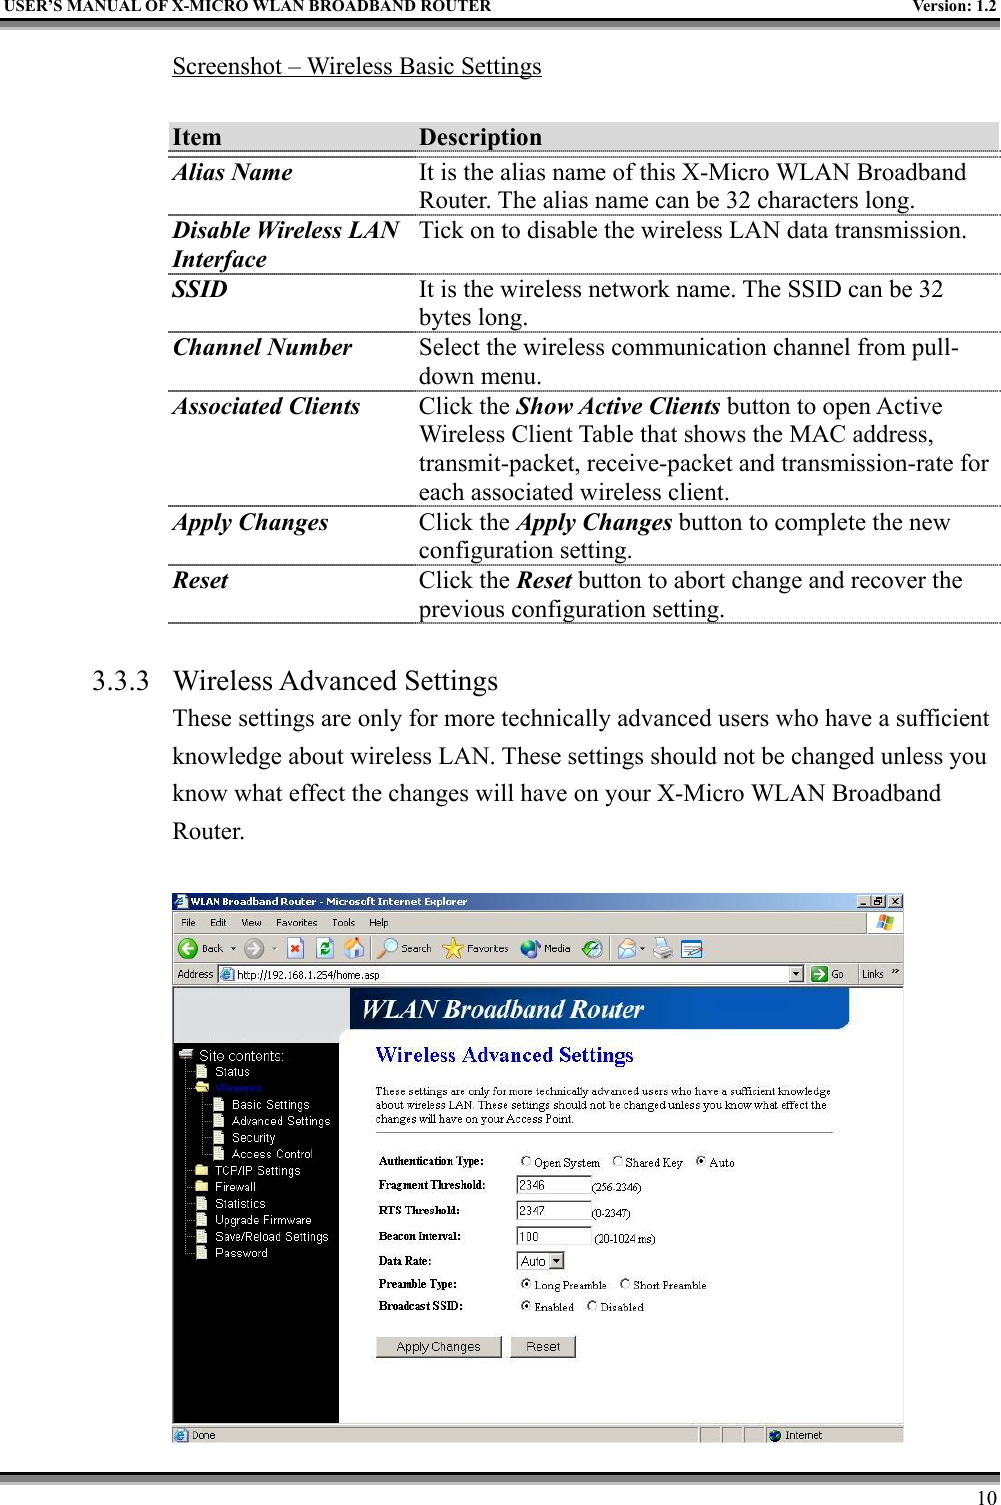 USER’S MANUAL OF X-MICRO WLAN BROADBAND ROUTER Version: 1.210Screenshot – Wireless Basic SettingsItem DescriptionAlias Name It is the alias name of this X-Micro WLAN BroadbandRouter. The alias name can be 32 characters long.Disable Wireless LANInterfaceTick on to disable the wireless LAN data transmission.SSID It is the wireless network name. The SSID can be 32bytes long.Channel Number Select the wireless communication channel from pull-down menu.Associated Clients Click the Show Active Clients button to open ActiveWireless Client Table that shows the MAC address,transmit-packet, receive-packet and transmission-rate foreach associated wireless client.Apply Changes Click the Apply Changes button to complete the newconfiguration setting.Reset Click the Reset button to abort change and recover theprevious configuration setting.3.3.3 Wireless Advanced SettingsThese settings are only for more technically advanced users who have a sufficientknowledge about wireless LAN. These settings should not be changed unless youknow what effect the changes will have on your X-Micro WLAN BroadbandRouter.